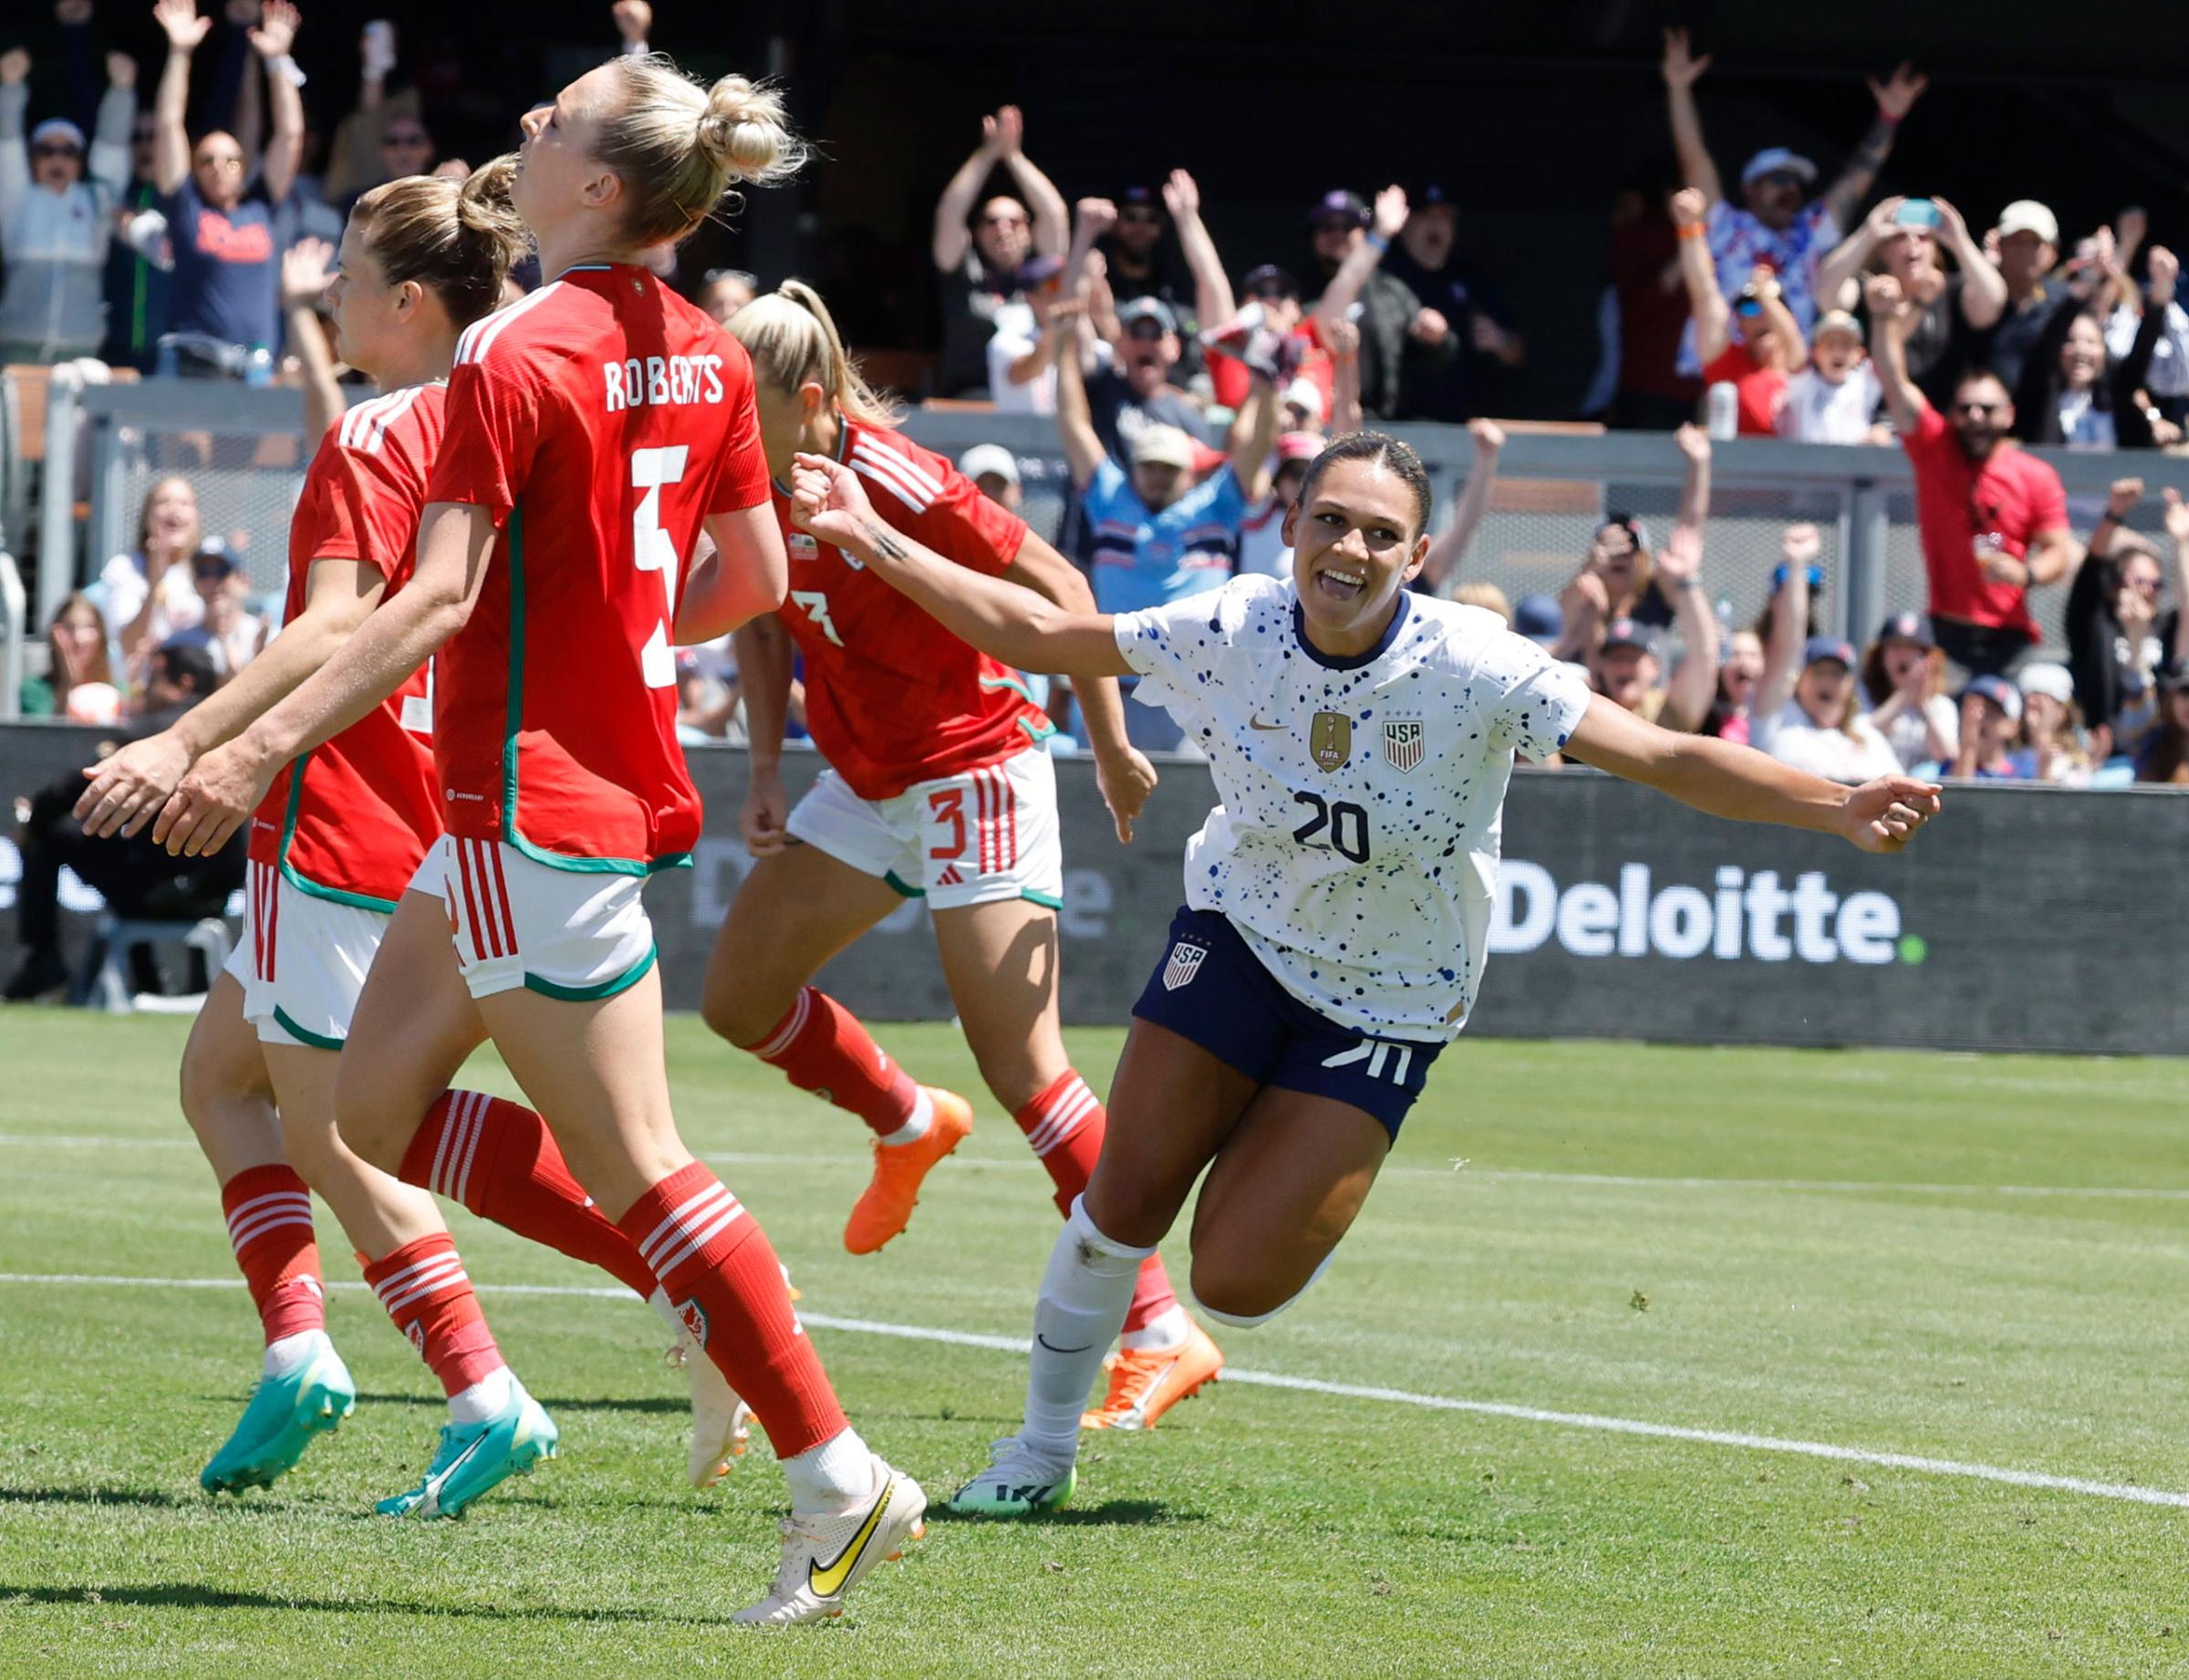 Trinity Rodman celebrates after scoring the first of her goals against Wales